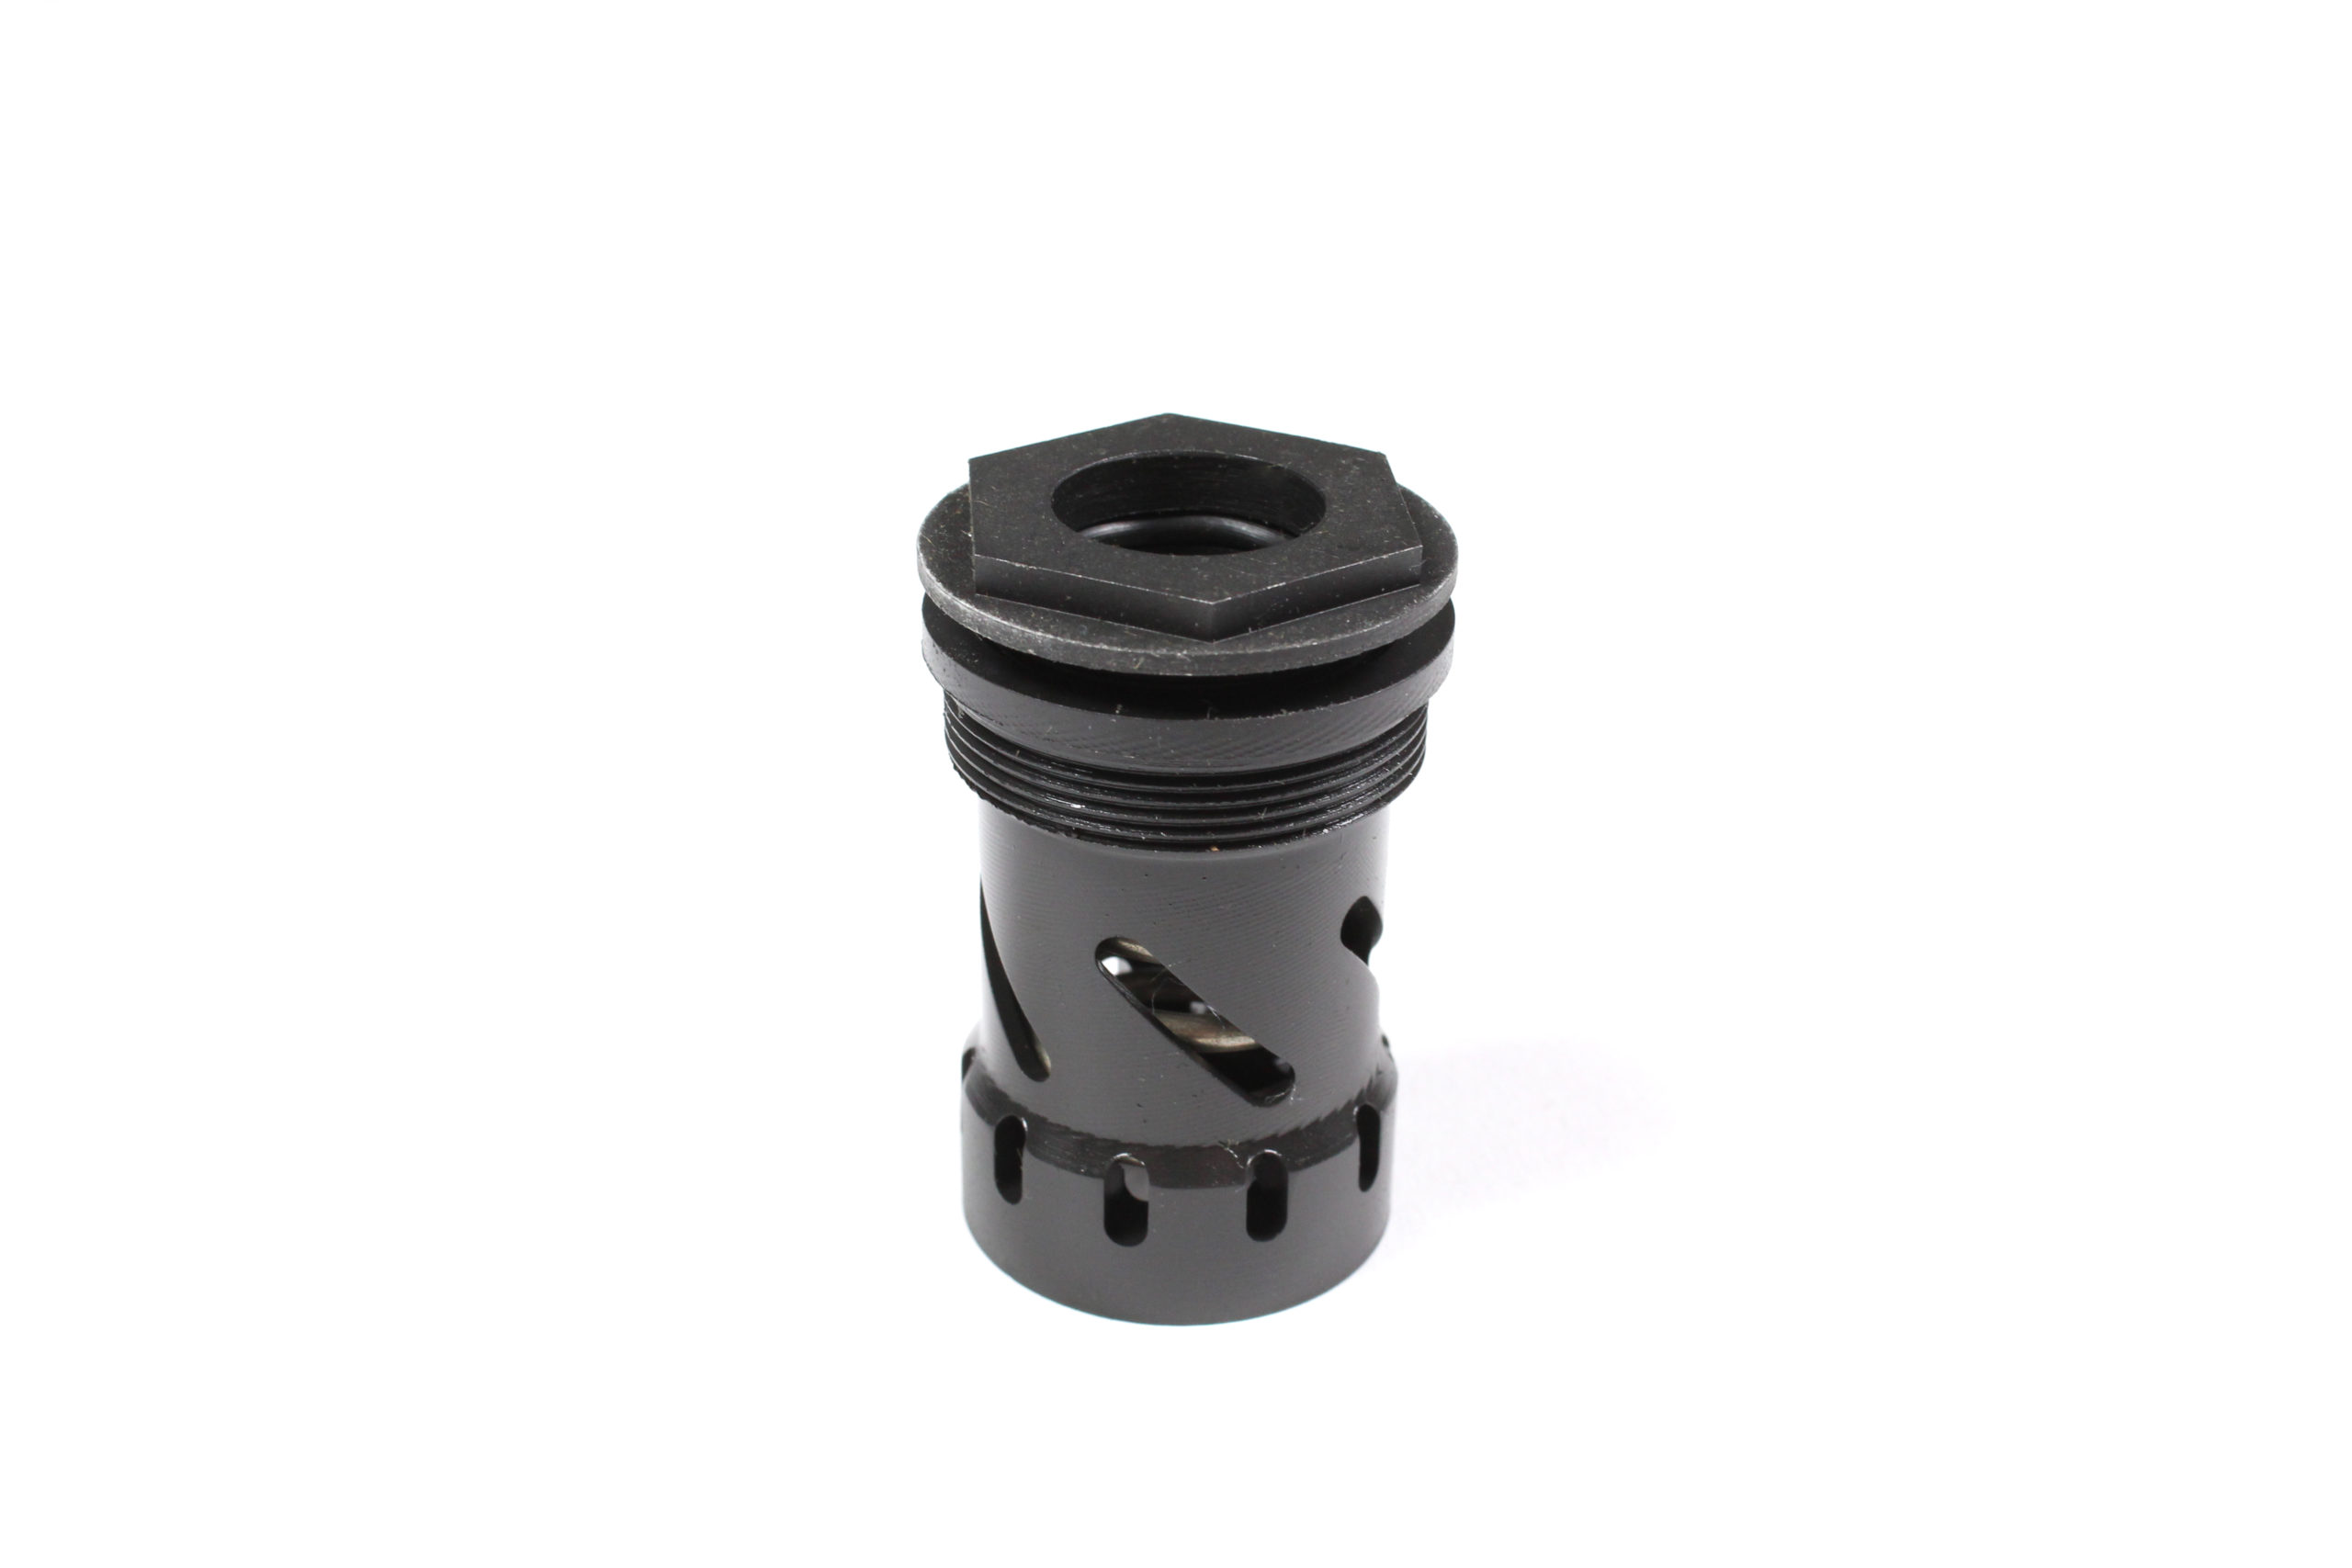 45 Cal Booster Housing with Adapter Piston - Quietbore.com